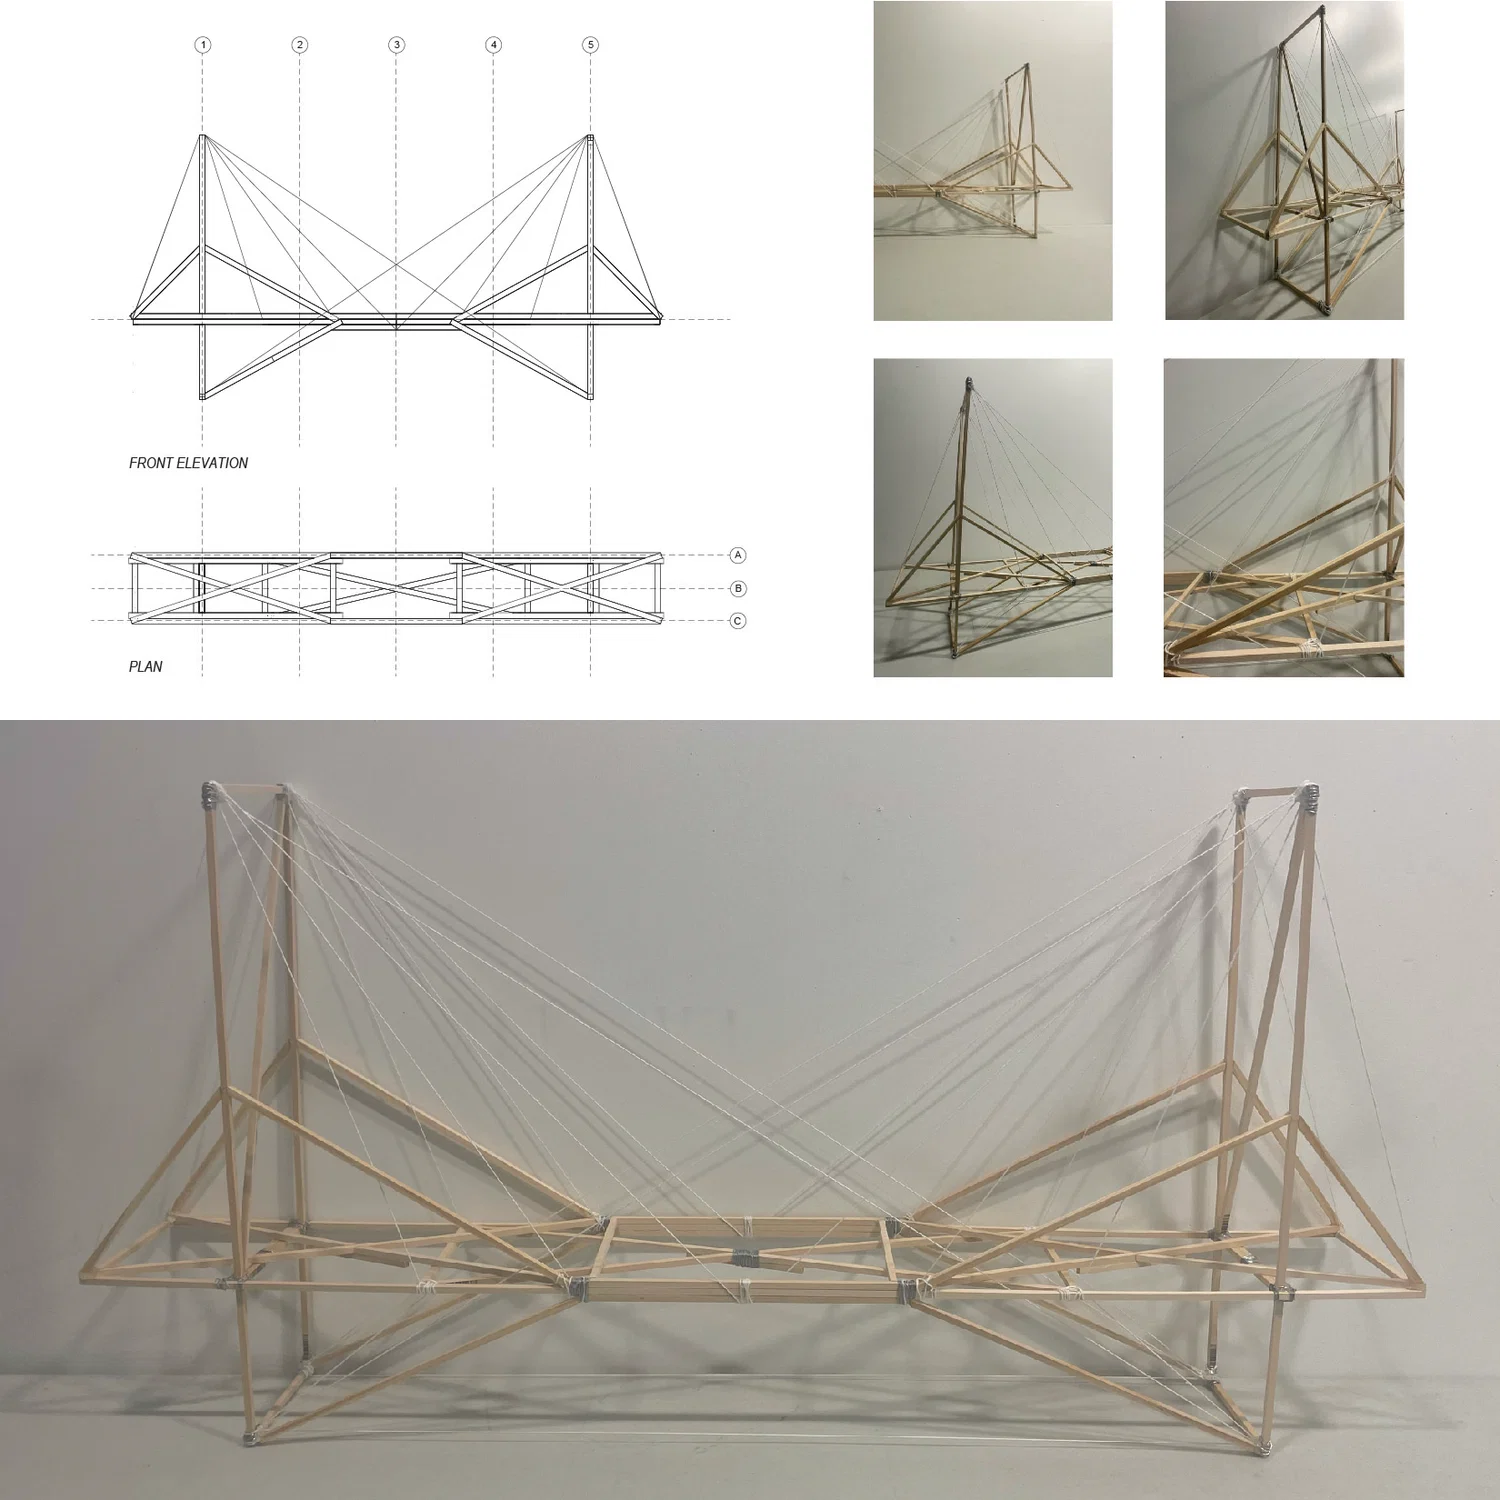 Bridge, Tension Structure. Modeled out of wooden sticks and tension strings.